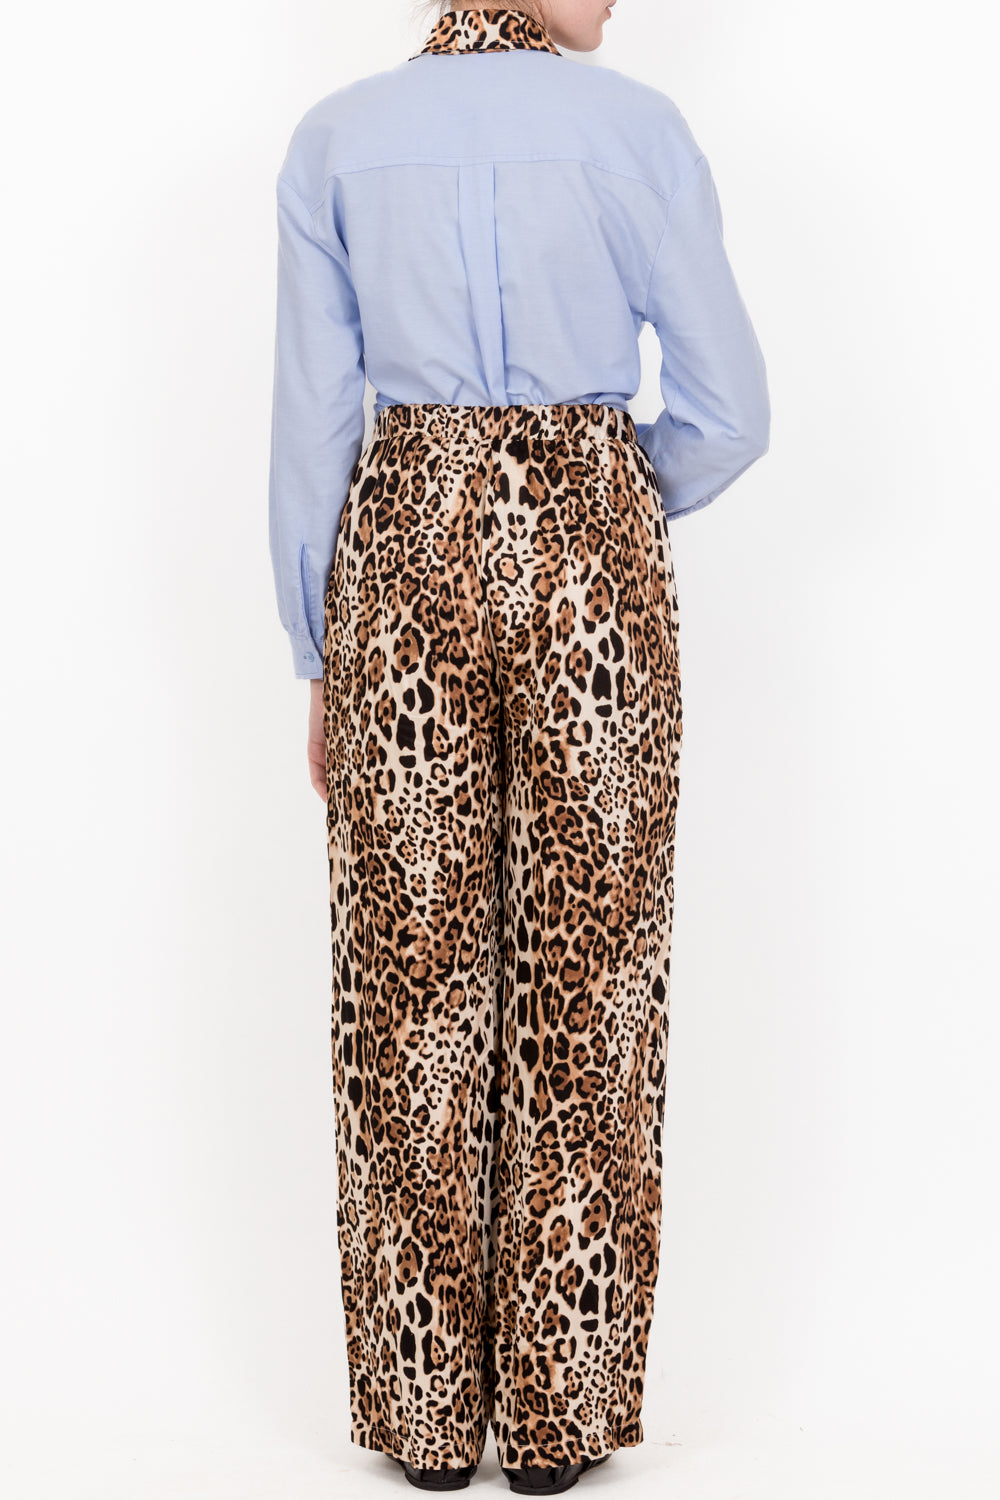 Tensione In - Pantalone animalier con coulisse fluido Art. 24P2143